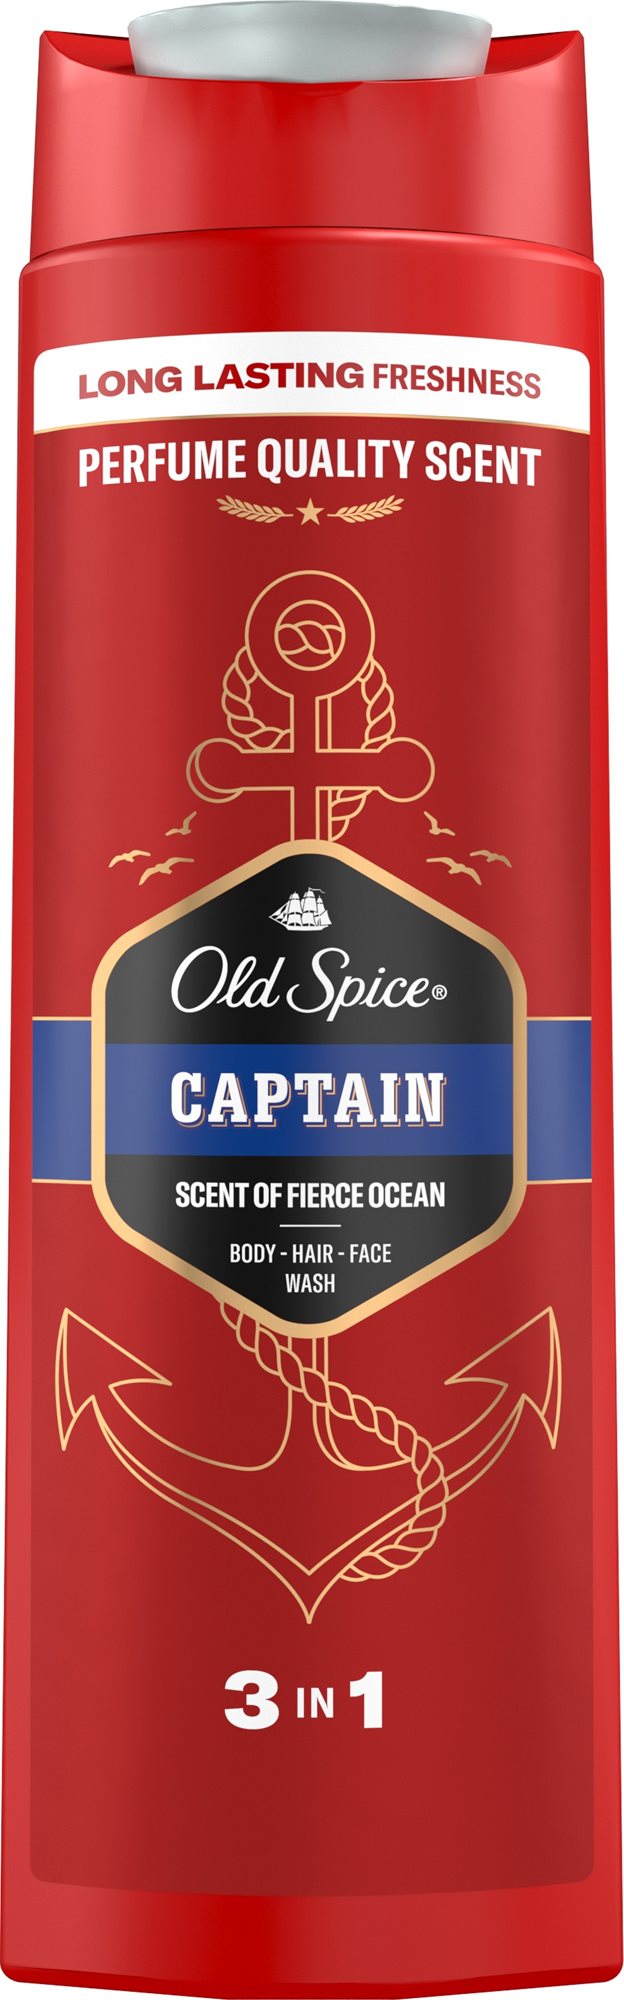 OLD SPICE Captain 400 ml